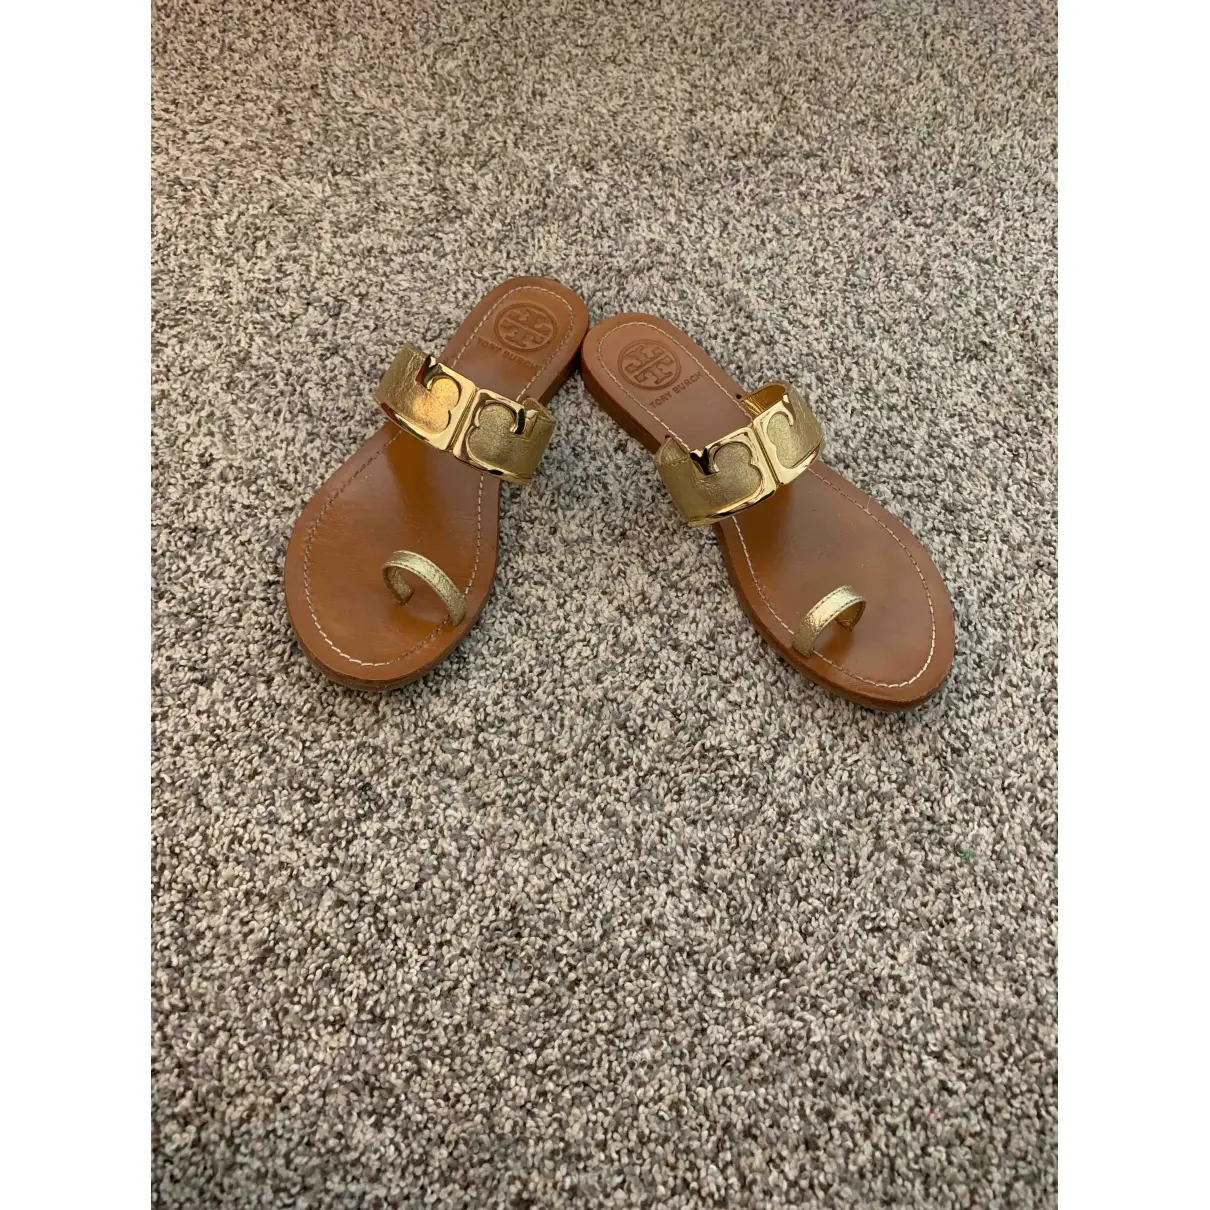 Buy Tory Burch Leather sandal online